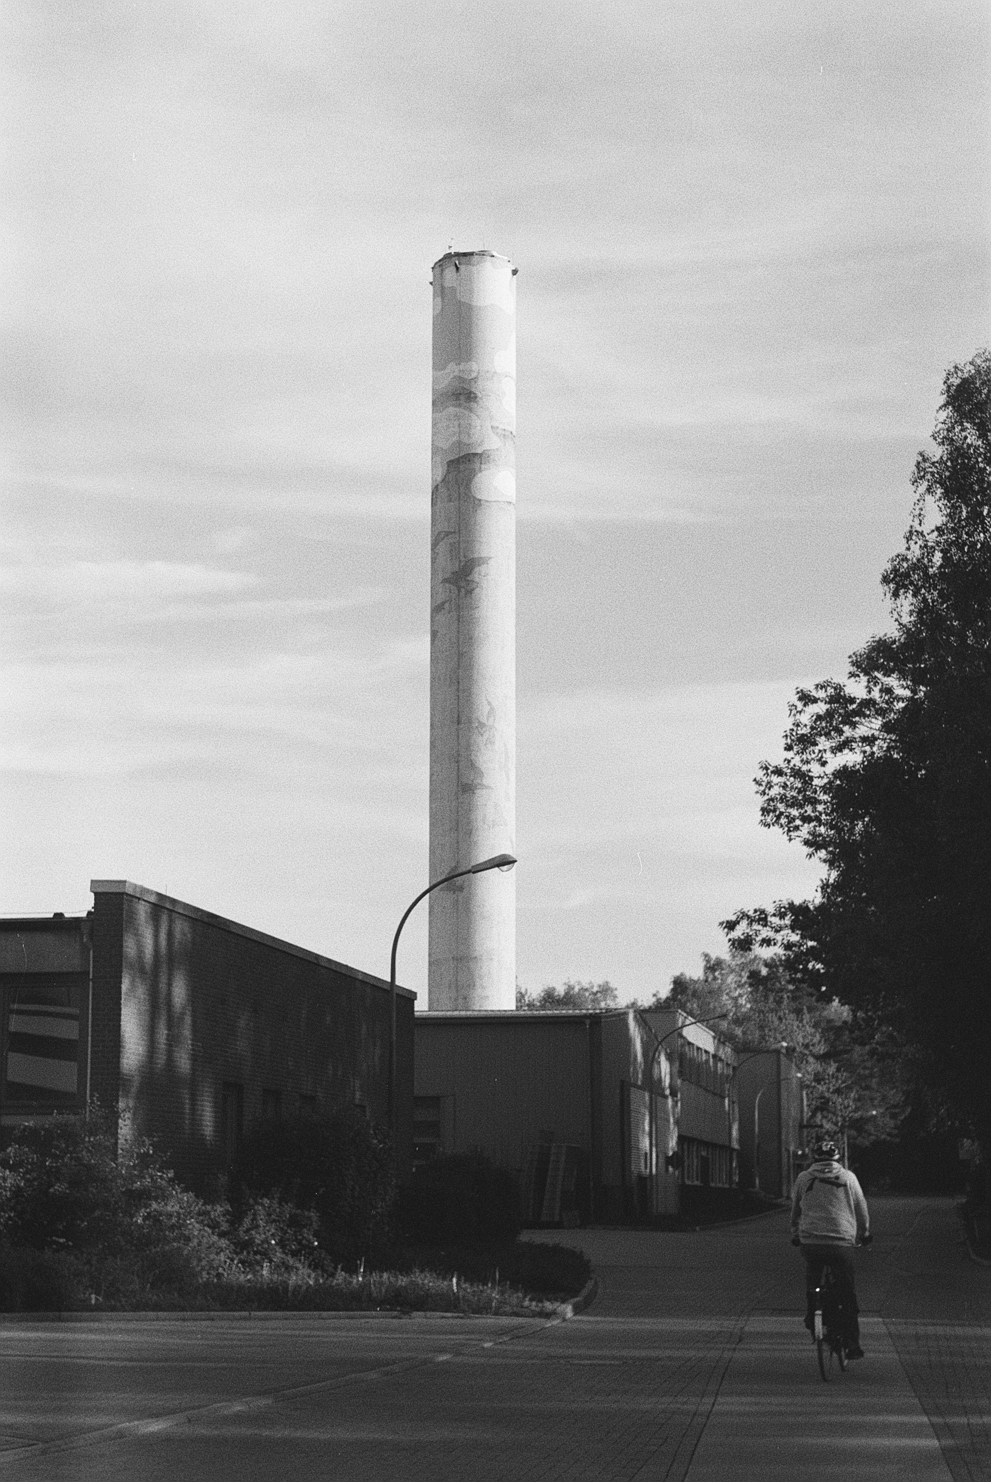 A person cycling down the road with a large chimney. Shot in Ilford Delta 400